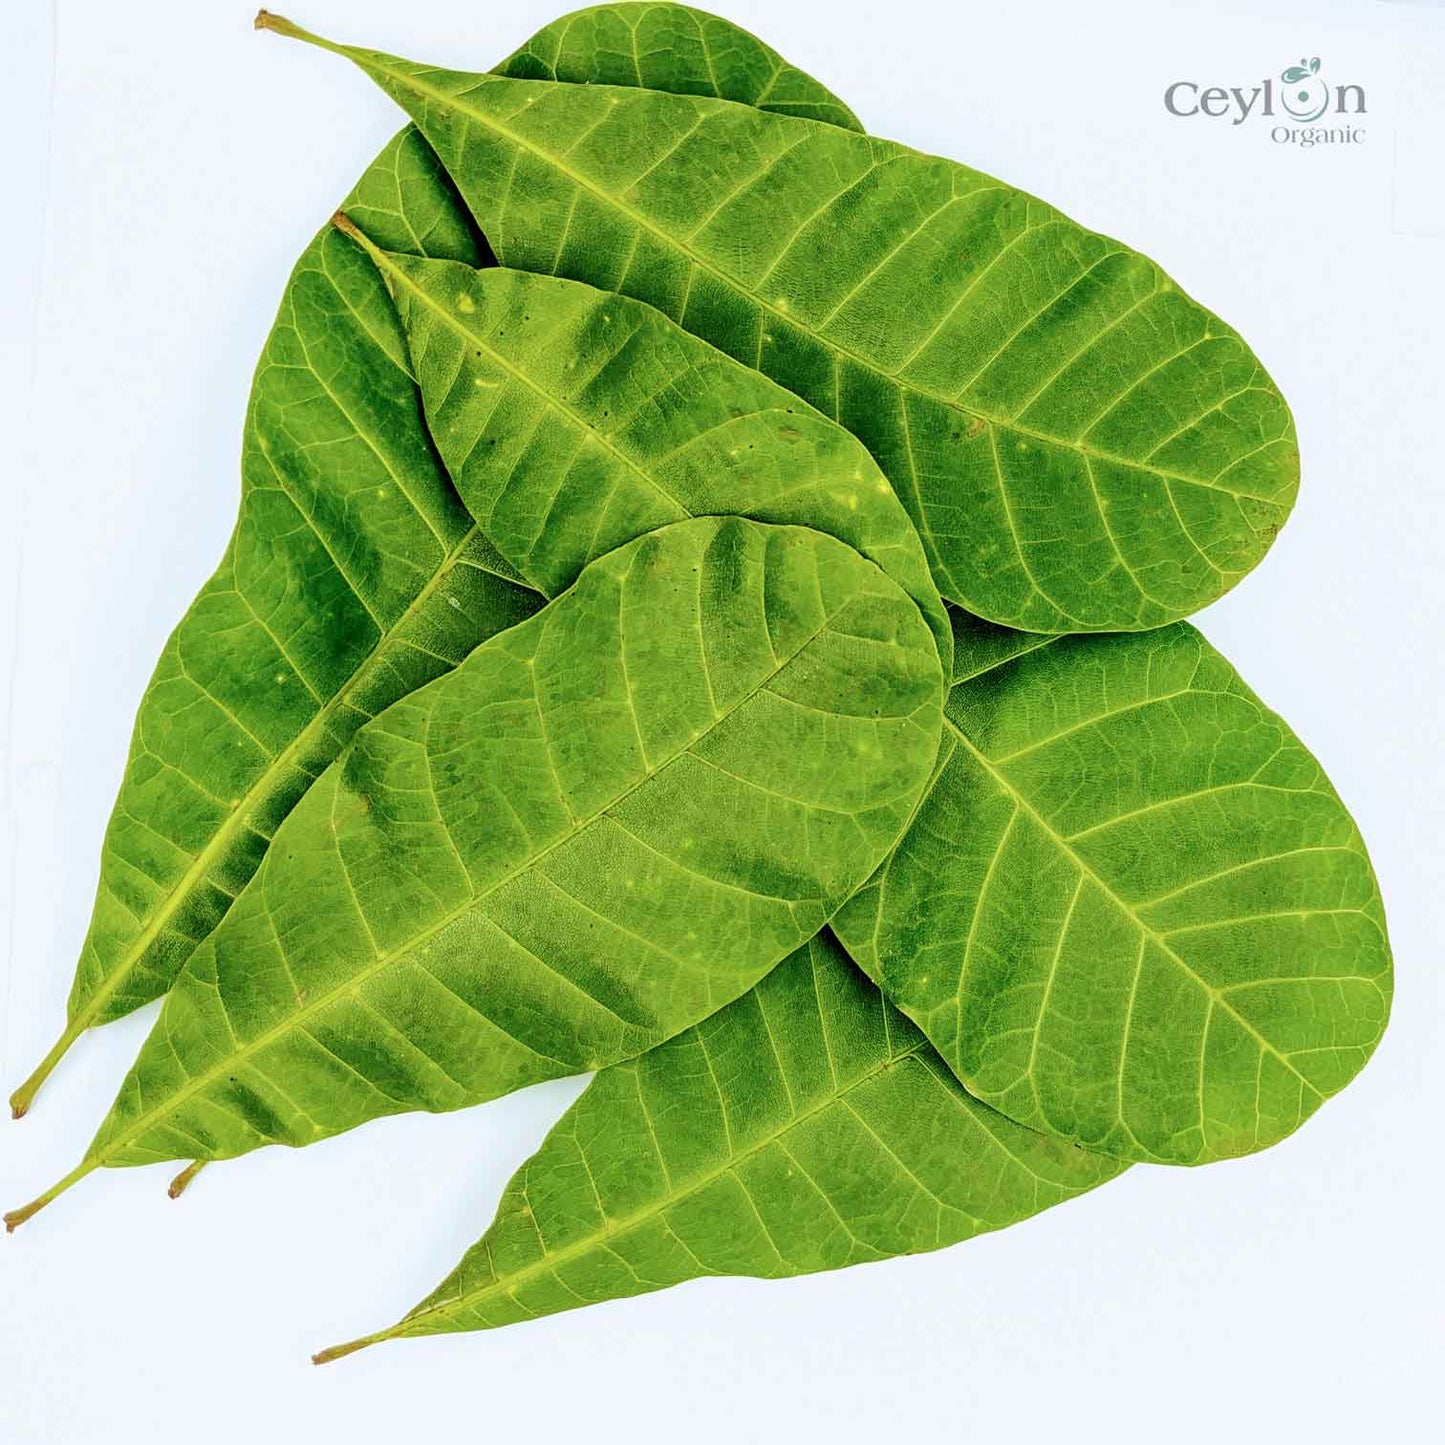 500+ Cashew Leaves for Healthy Living,Dried Cashew Leaves (Anacardium occidentale) | Ceylon Organic-1